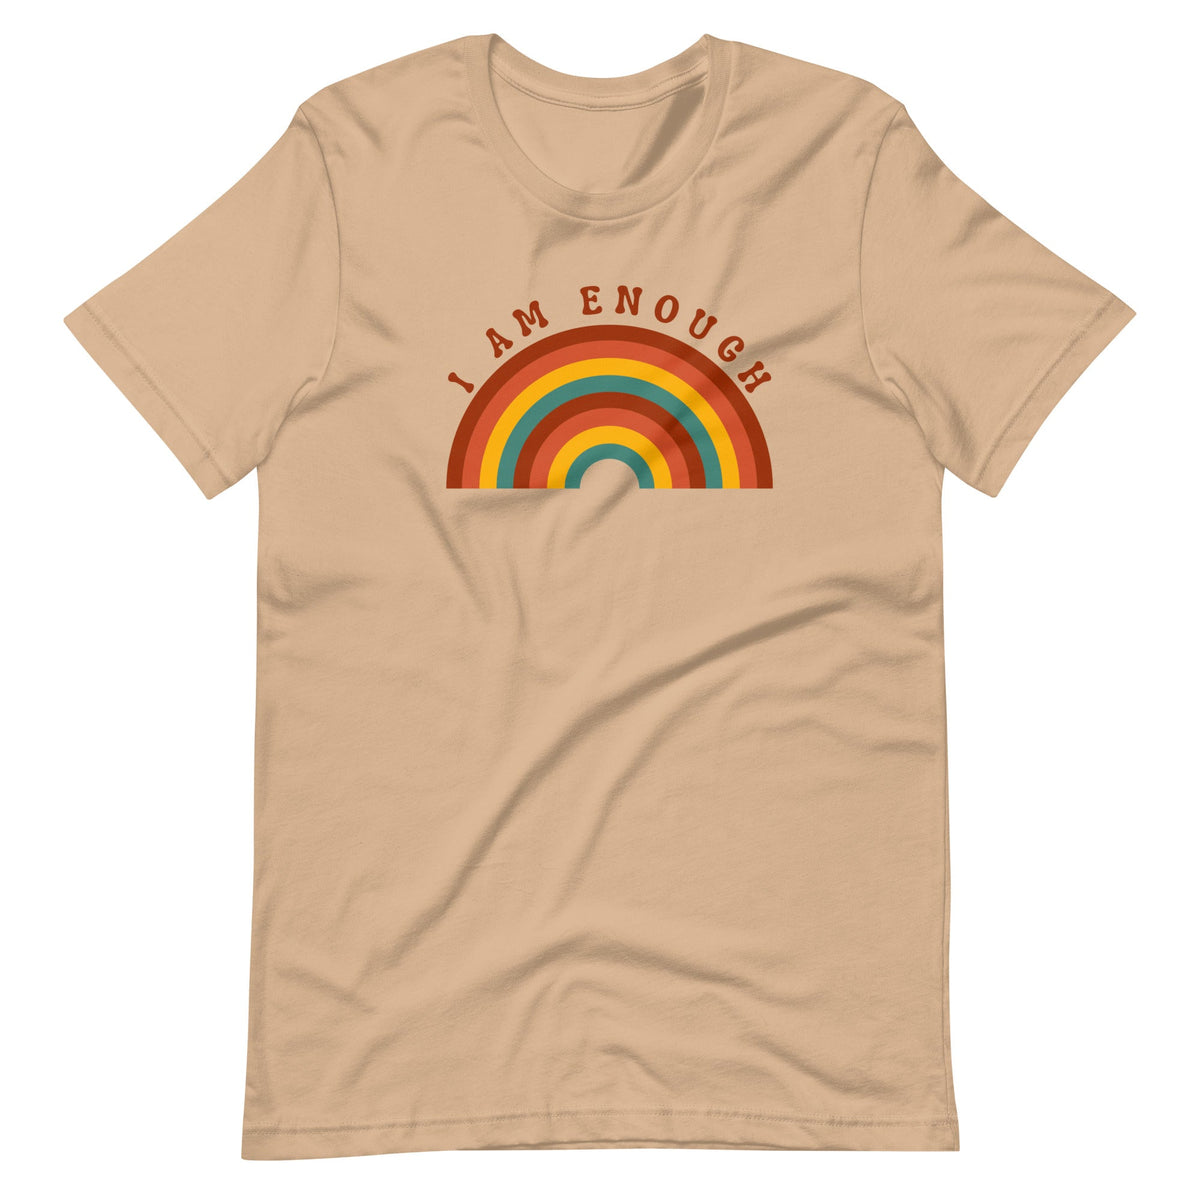 I AM ENOUGH RAINBOW - Inspirational Affirmation T-Shirt for Men | I Am Enough Collection